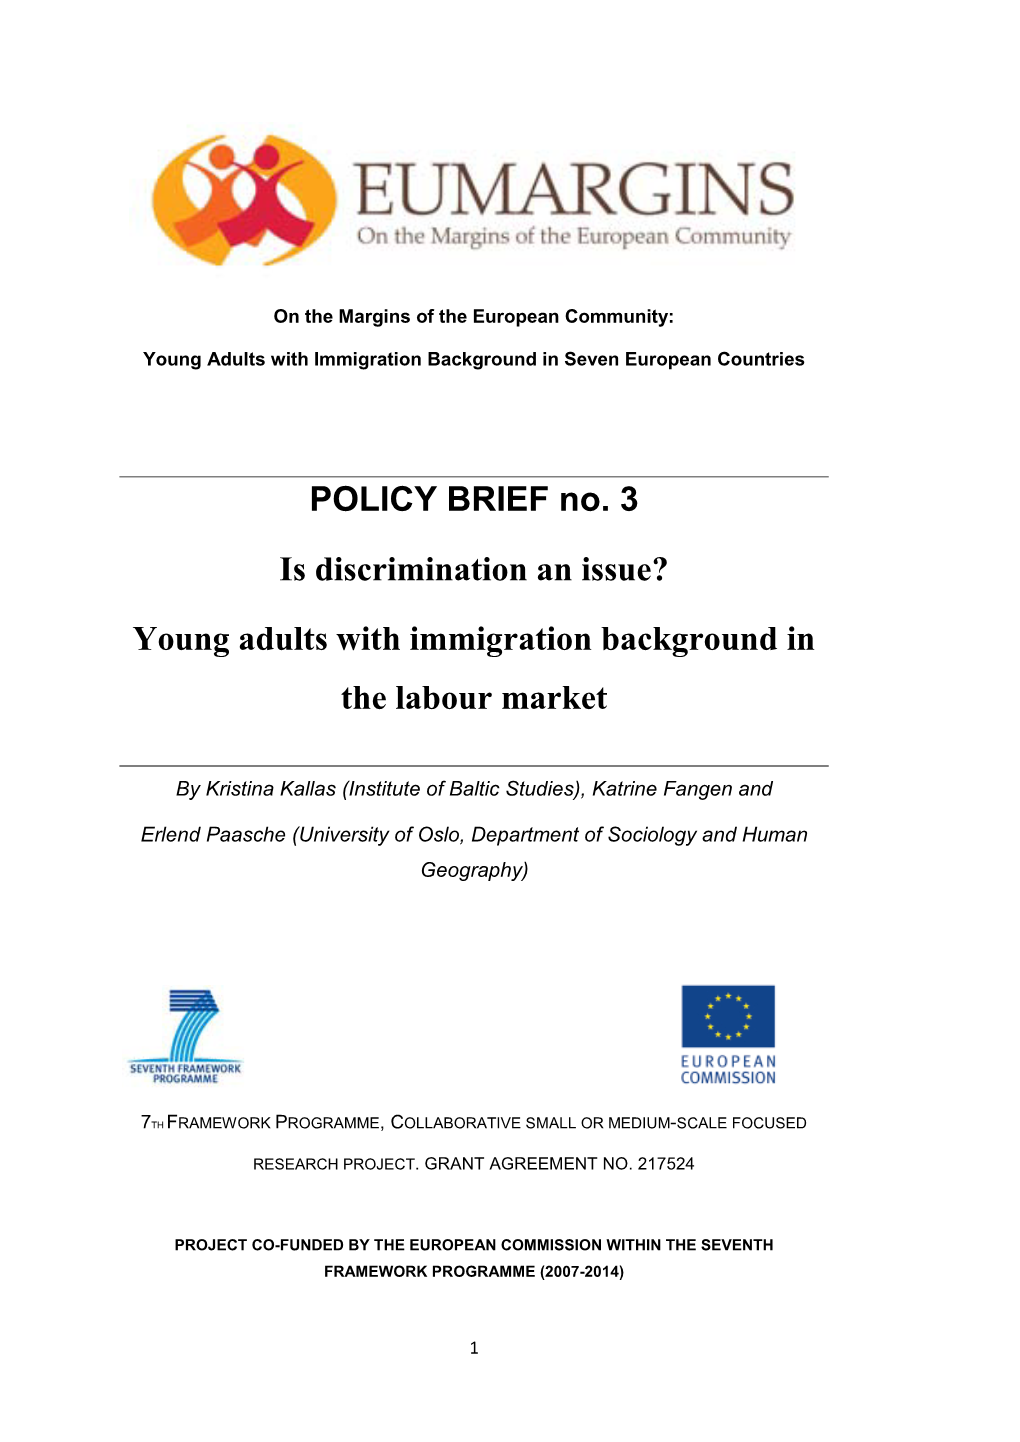 POLICY BRIEF No. 3 Is Discrimination an Issue?